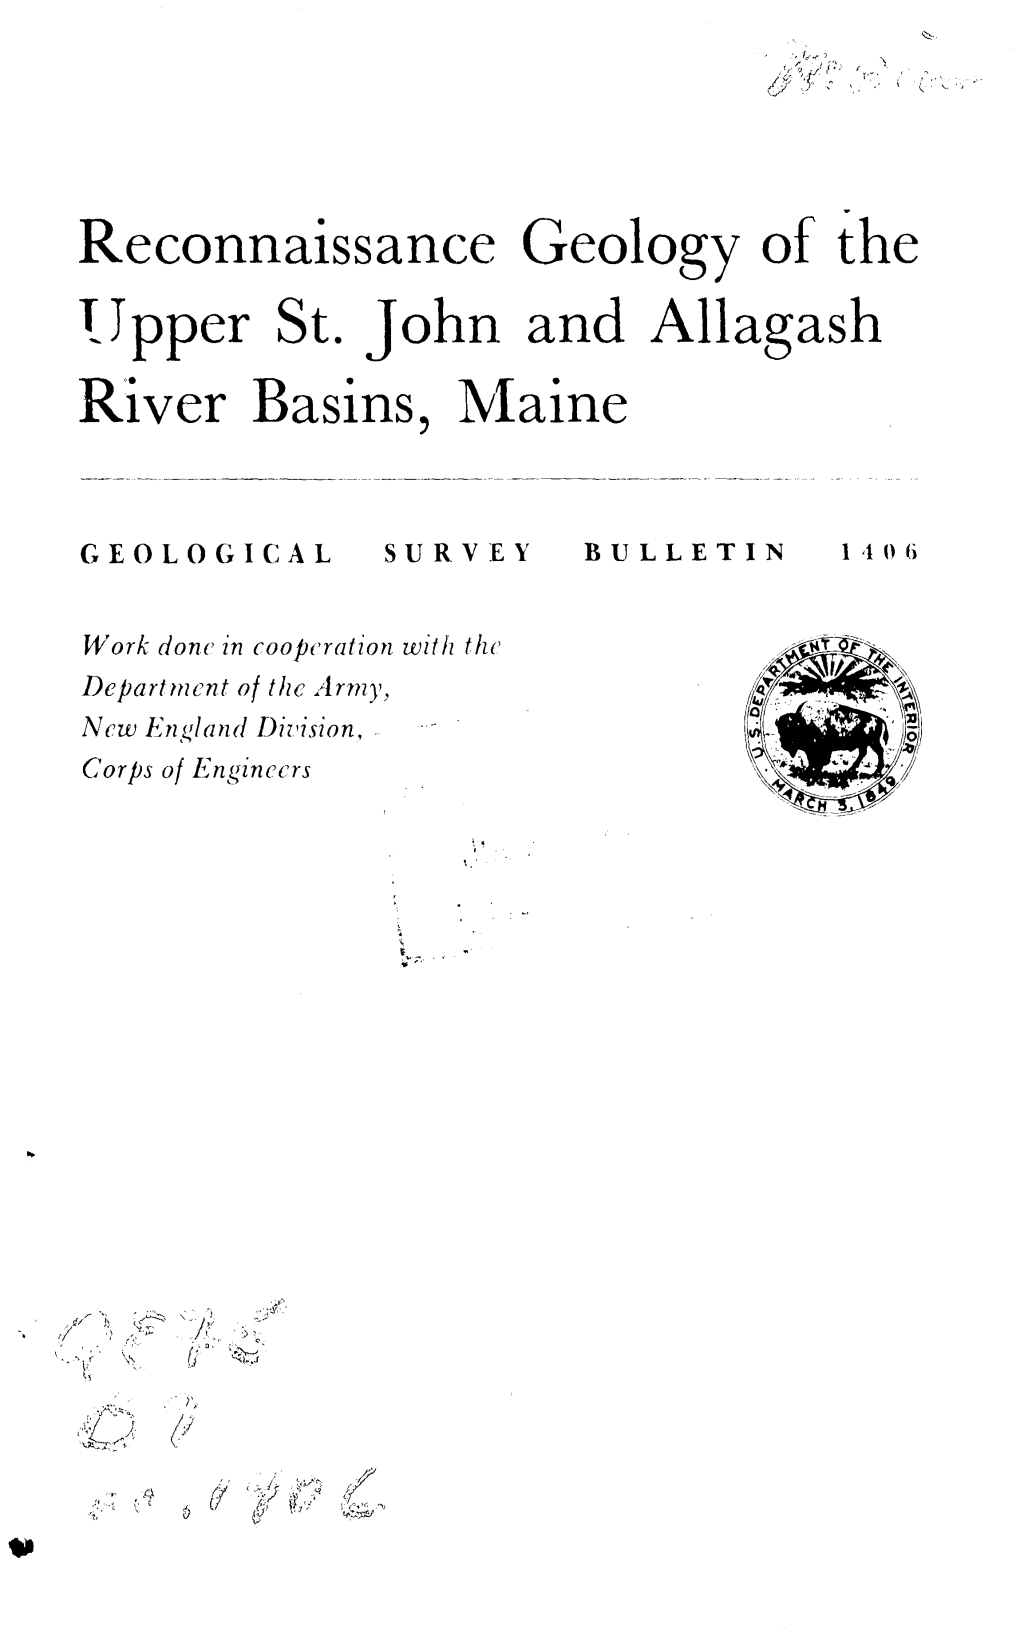 Reconnaissance Geology of the Upper St. John and Allagash River Basins, Maine